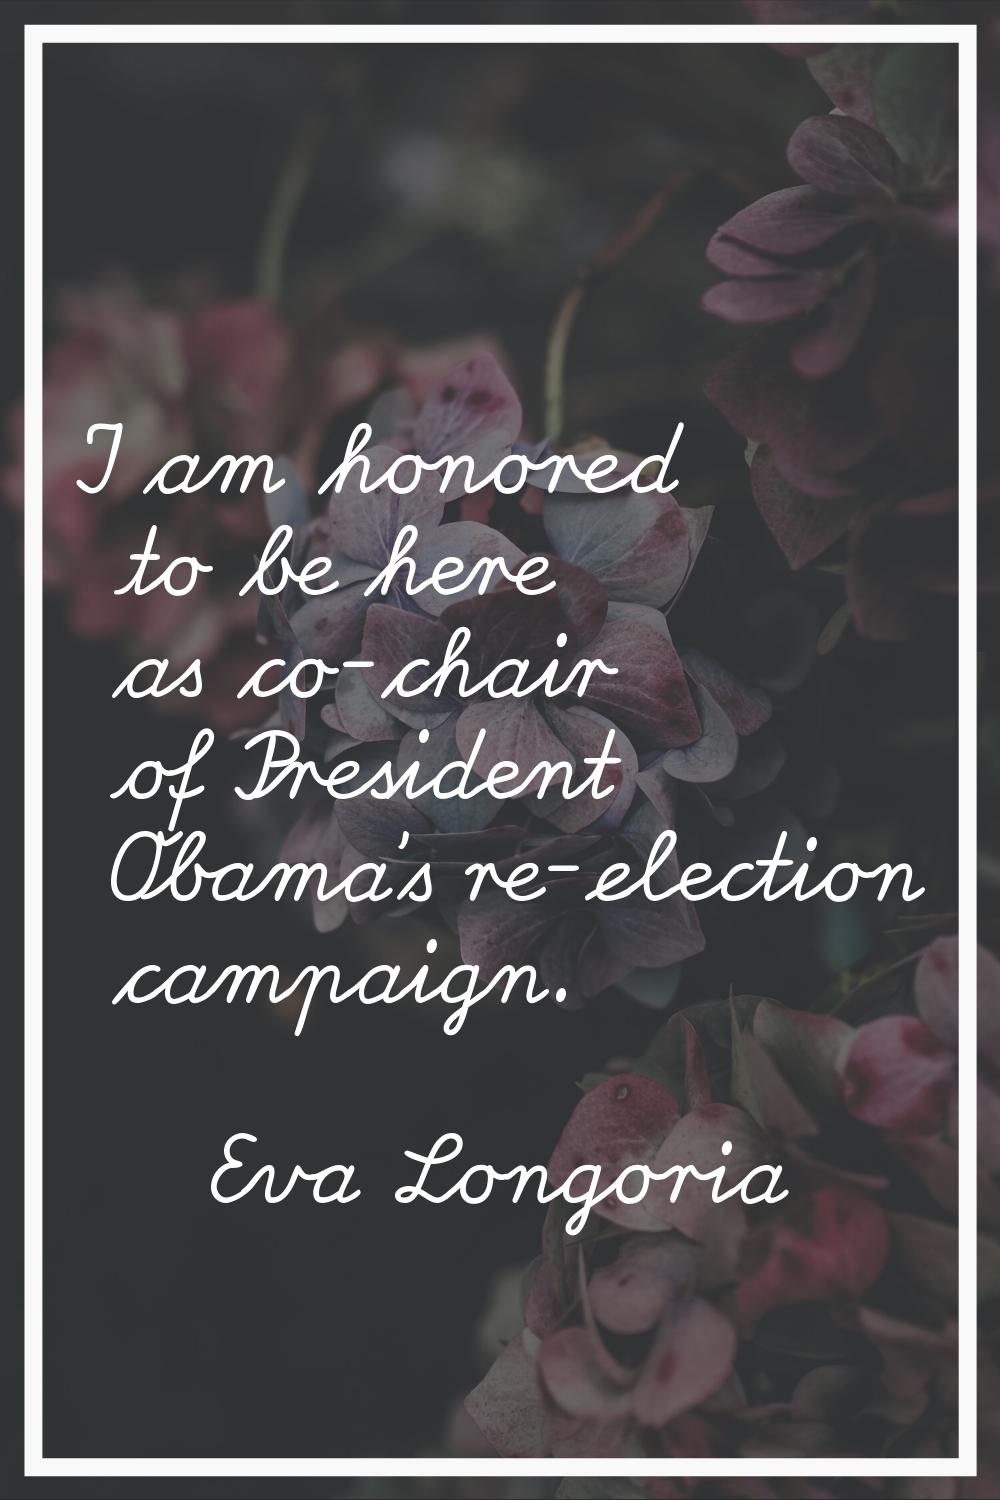 I am honored to be here as co-chair of President Obama's re-election campaign.